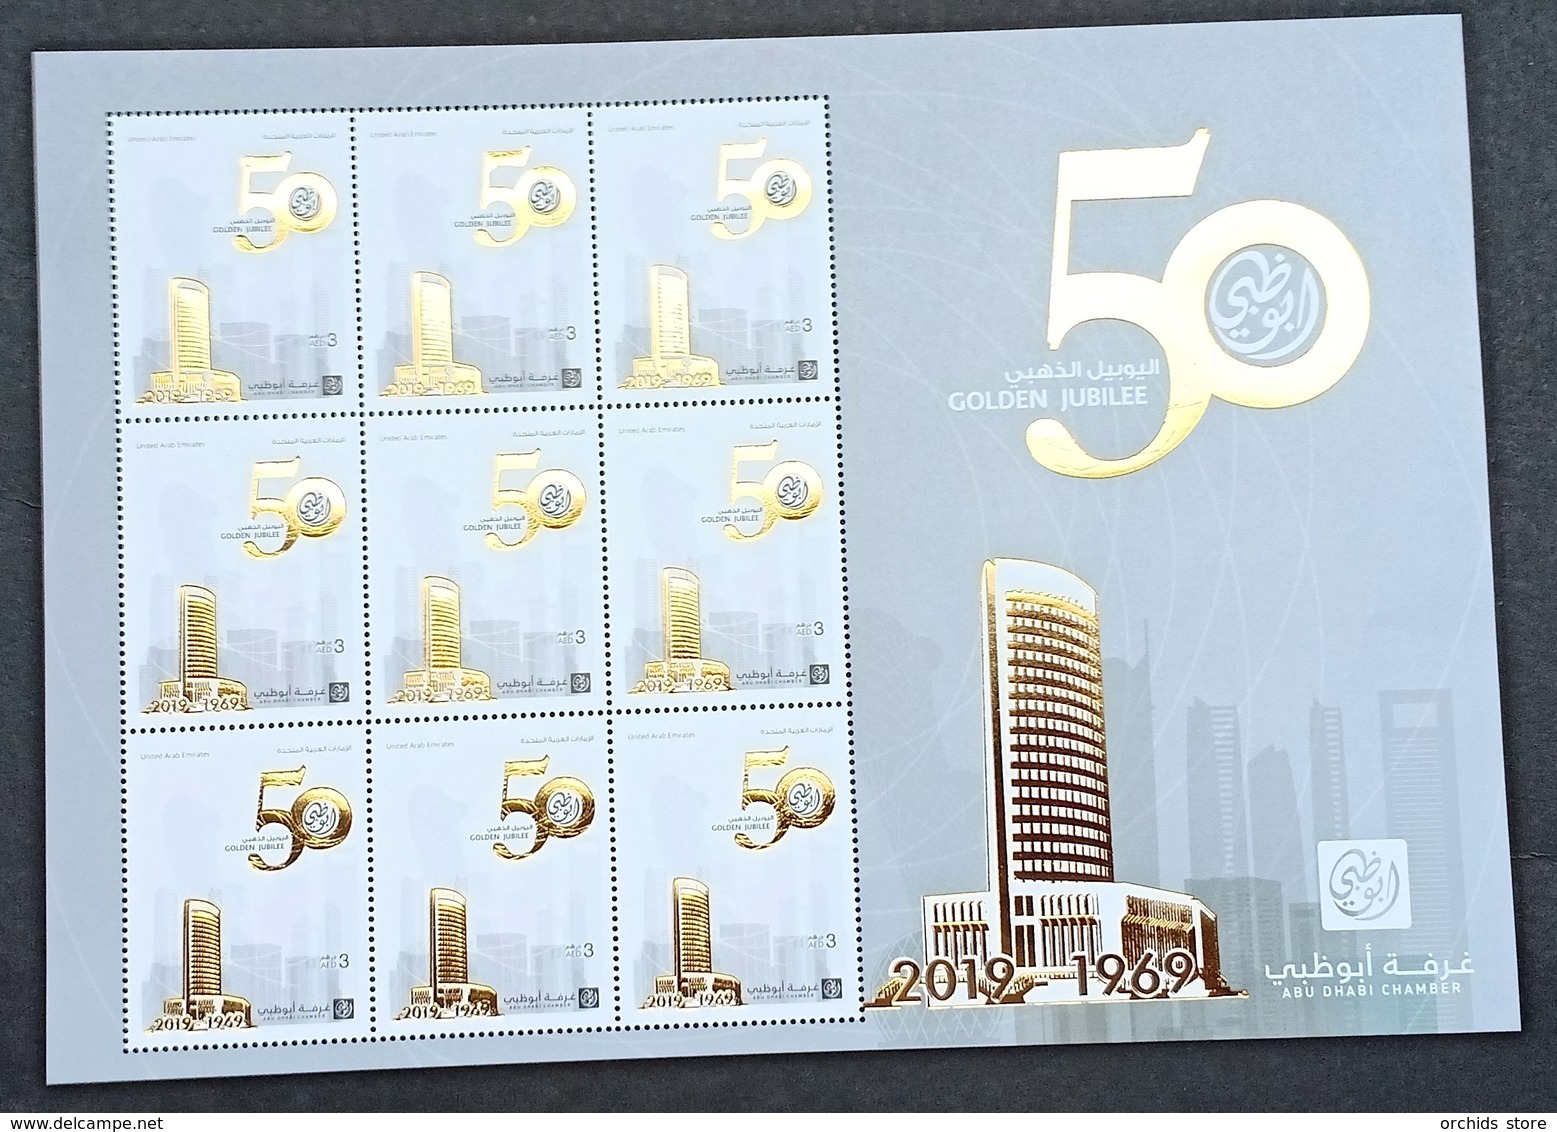 UAE 2019 NEW MNH FULL SHEET - Golden Jubilee Of Abu Dhabi Chamber Of Commerce - Gold Palted And Embossed - United Arab Emirates (General)